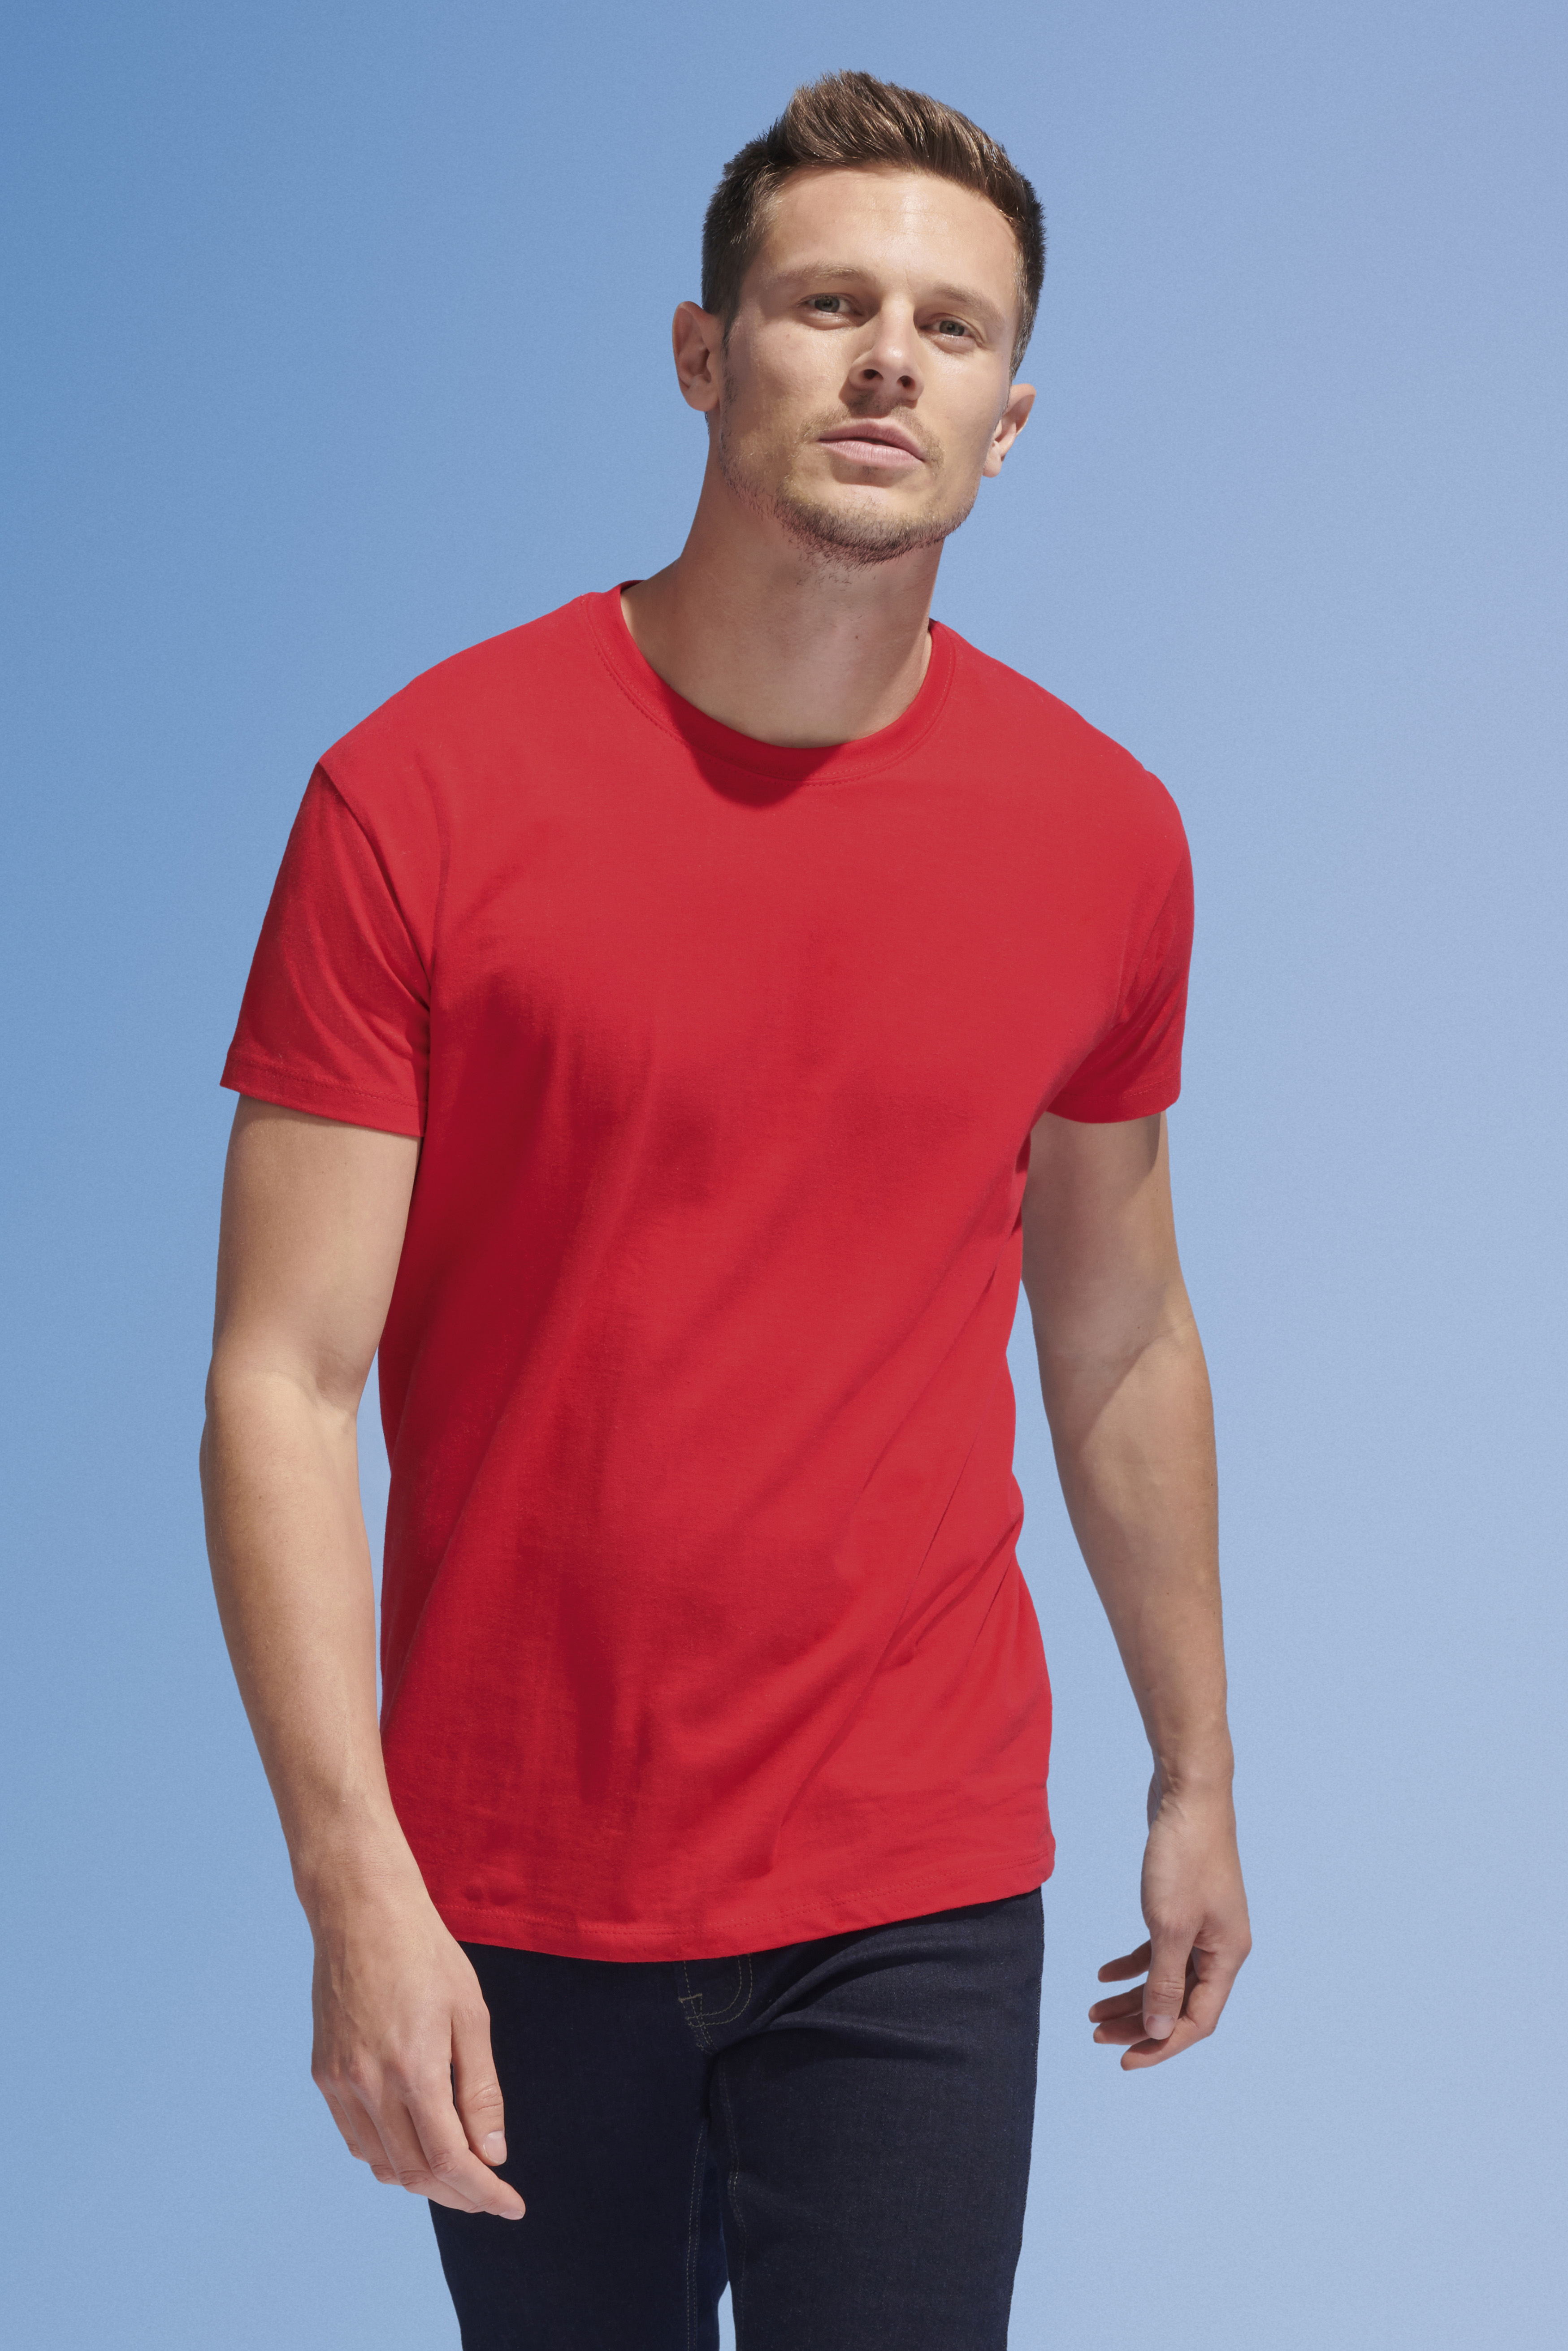 TEE SHIRT HOMME SOL'S QUALITE SUPERIEURE Imperial